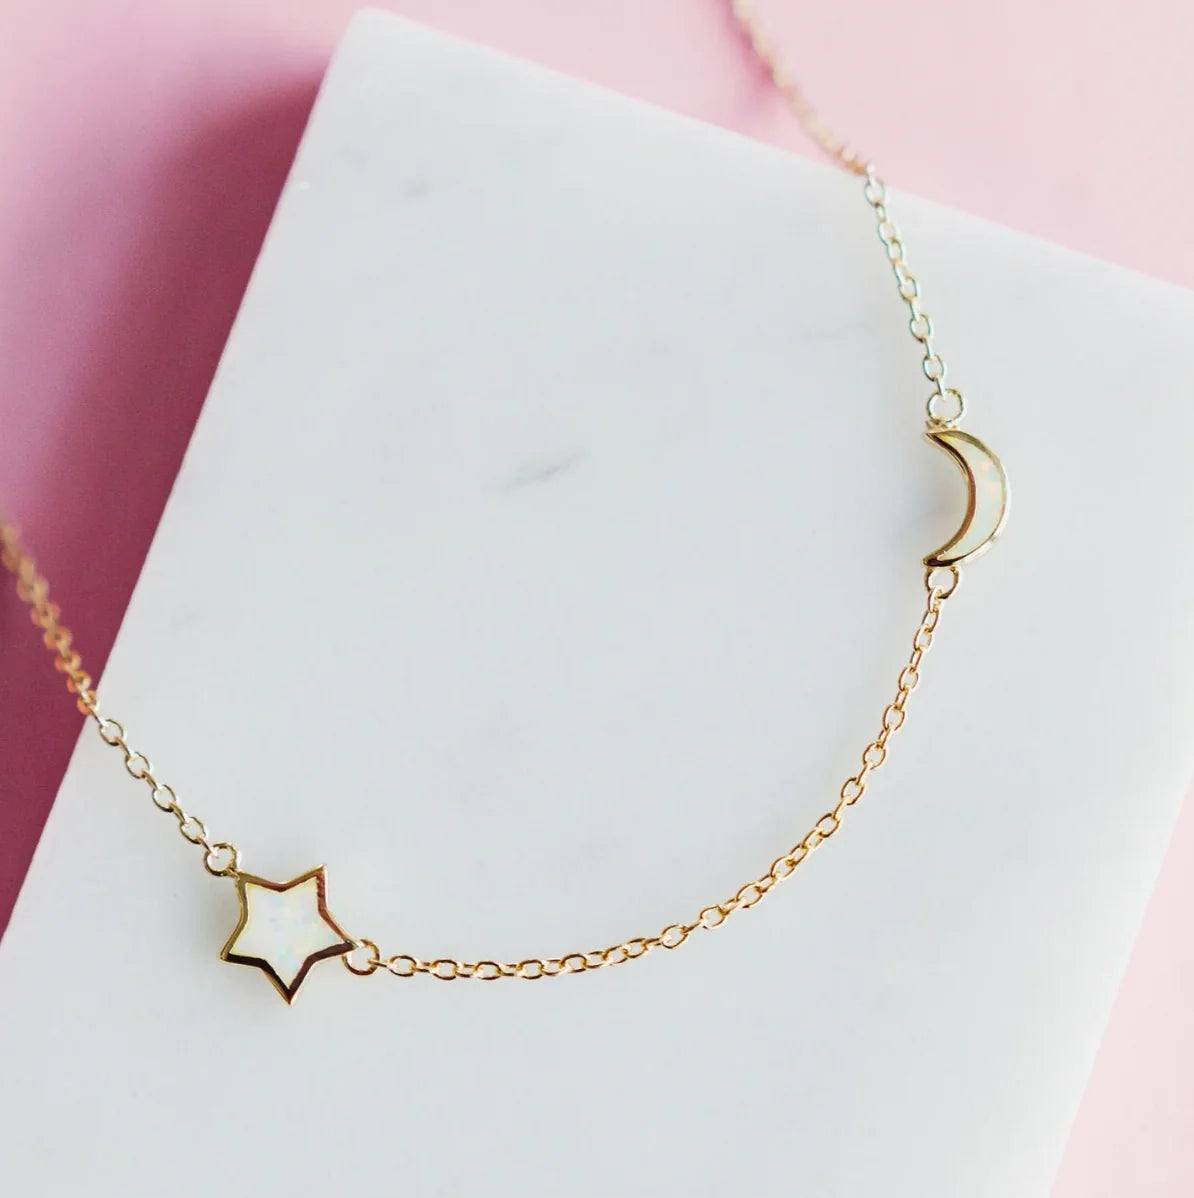 Chloe + Lois "Starry Night" Necklace in White Opal